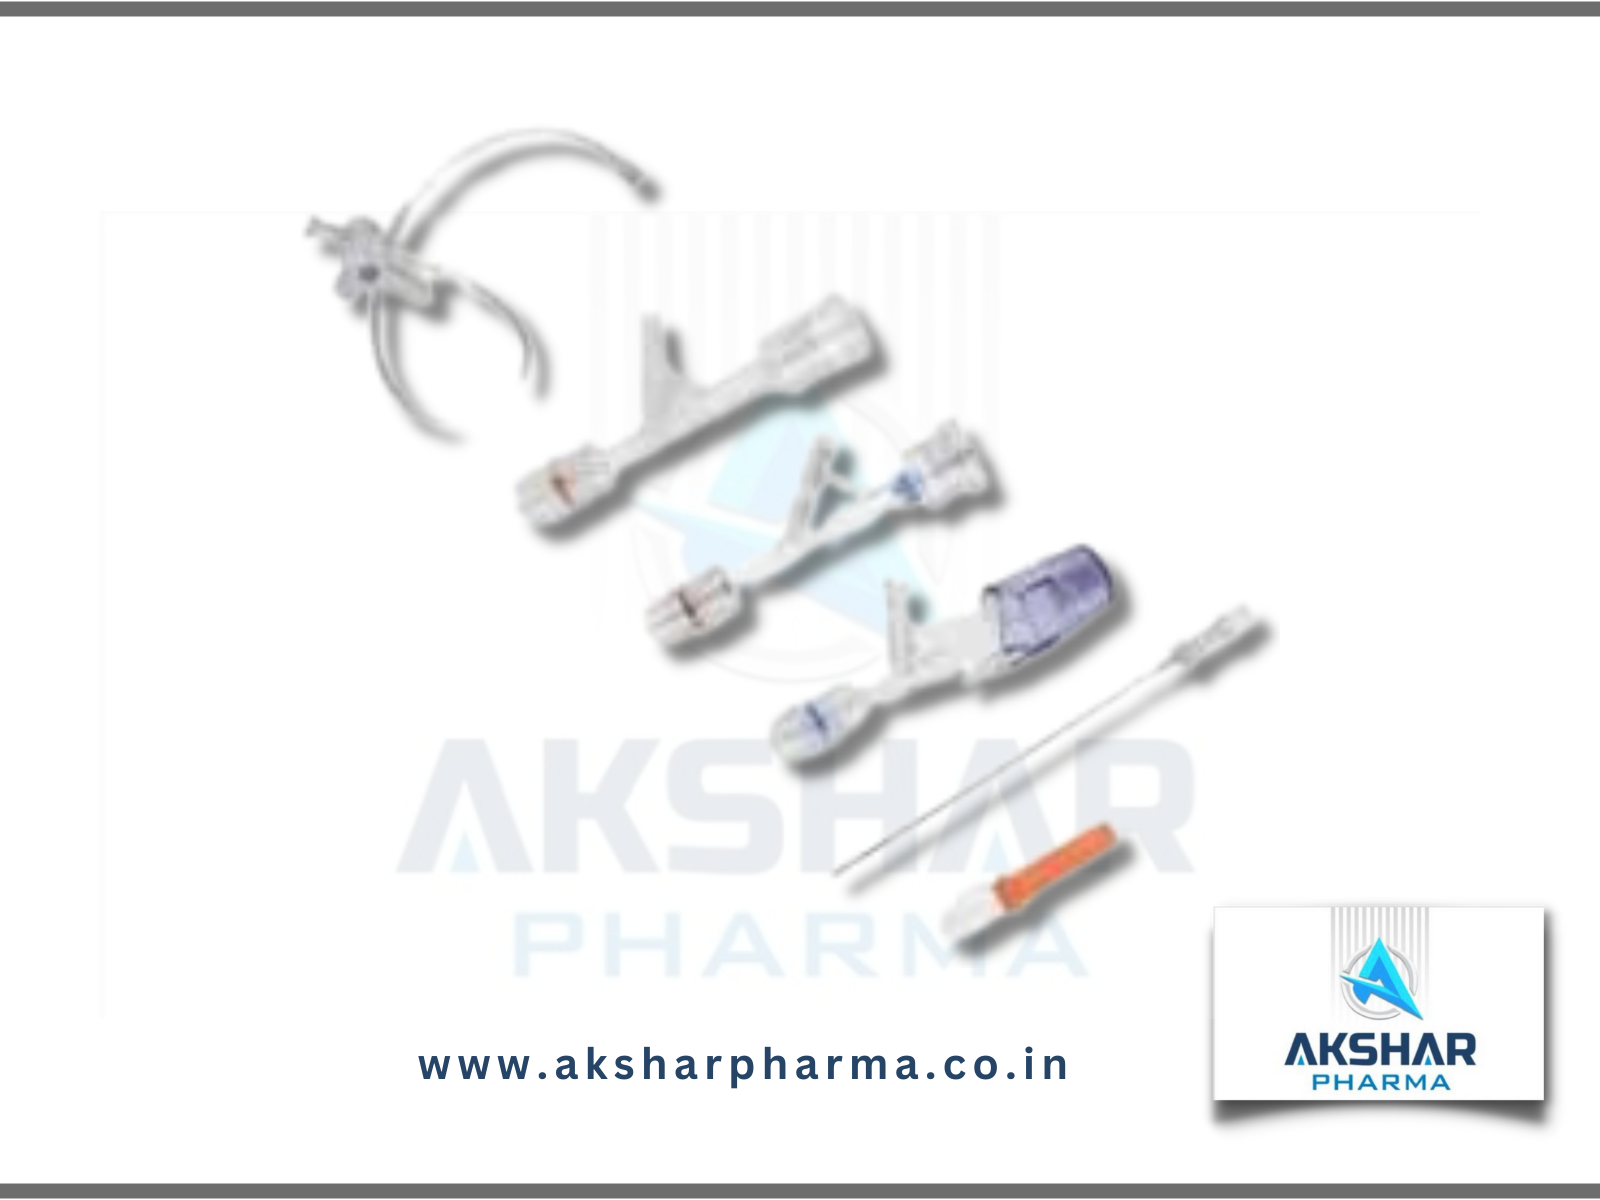 Merit Angioplasty Pack Y- Connector